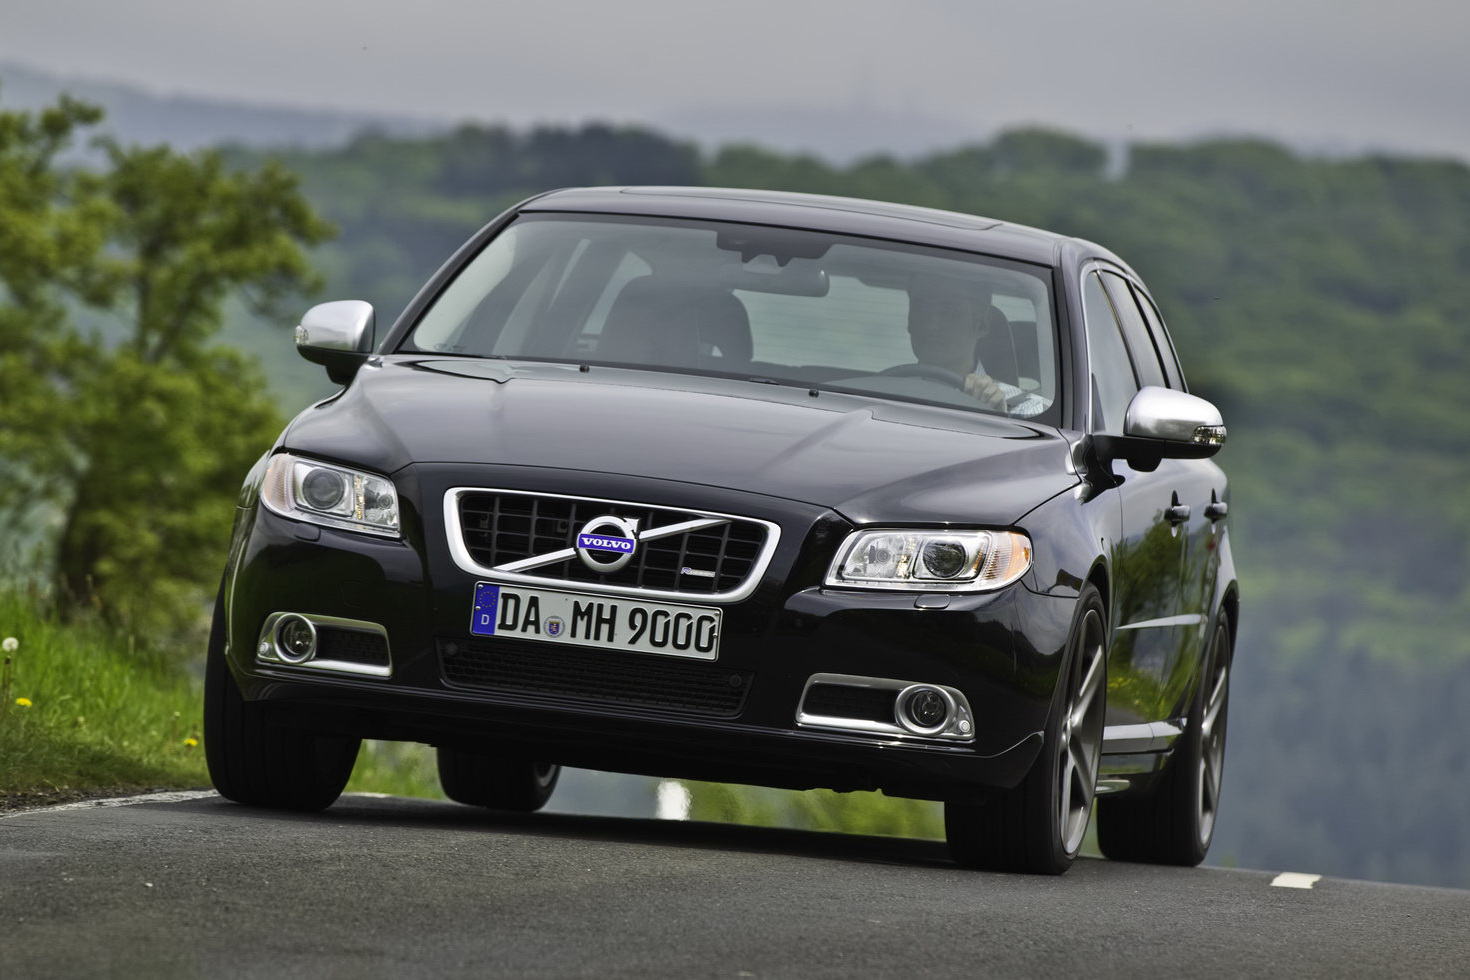 Limited Edition Volvo V70 T6 AWD R-Design with 325HP by Heico Sportiv